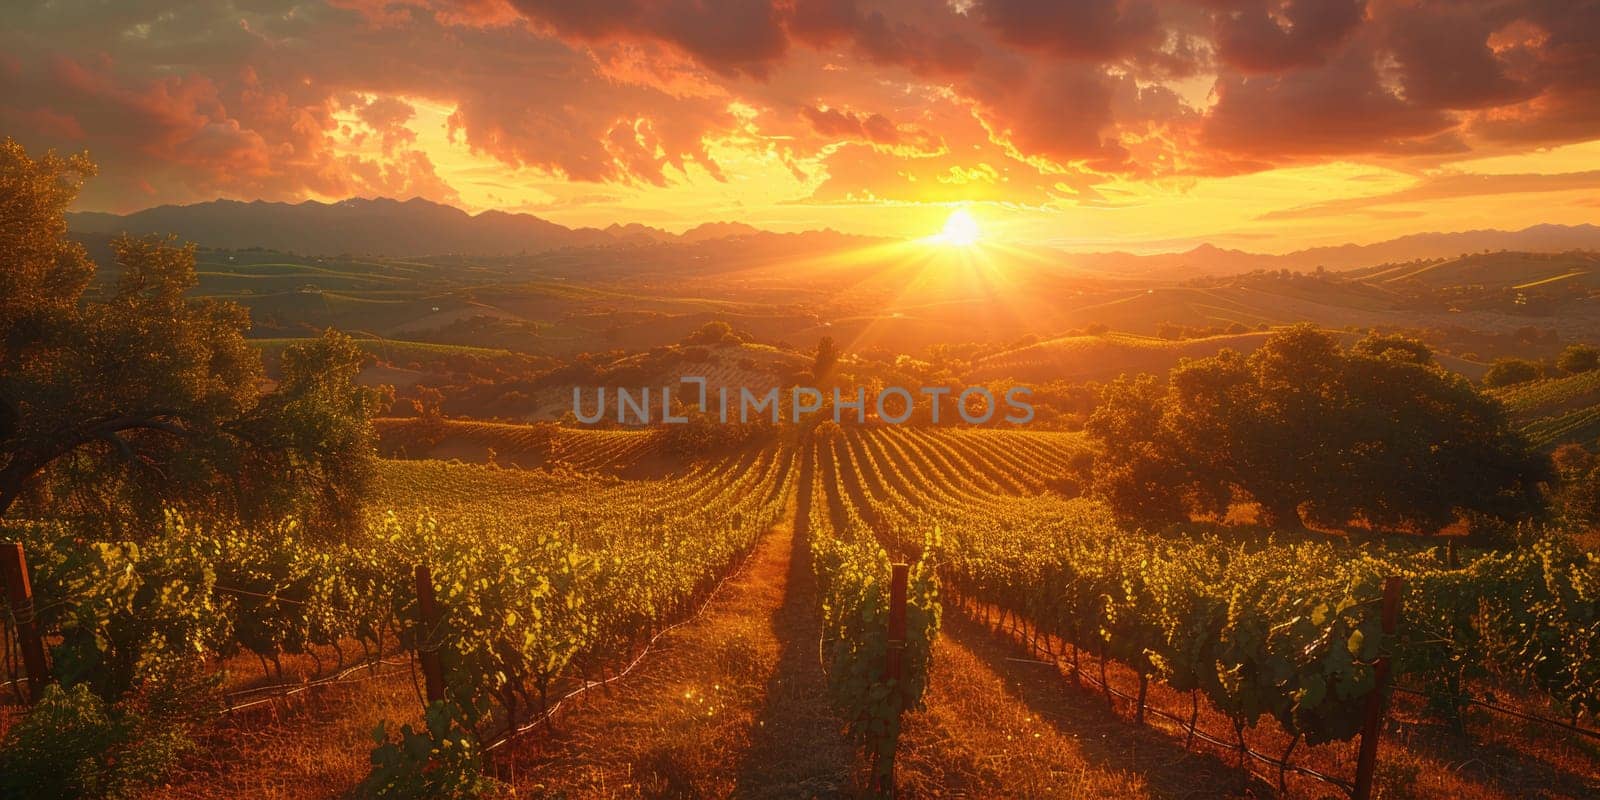 The sun is setting over a vineyard, casting a warm glow on the rows of grapevines and highlighting the beauty of the landscape.